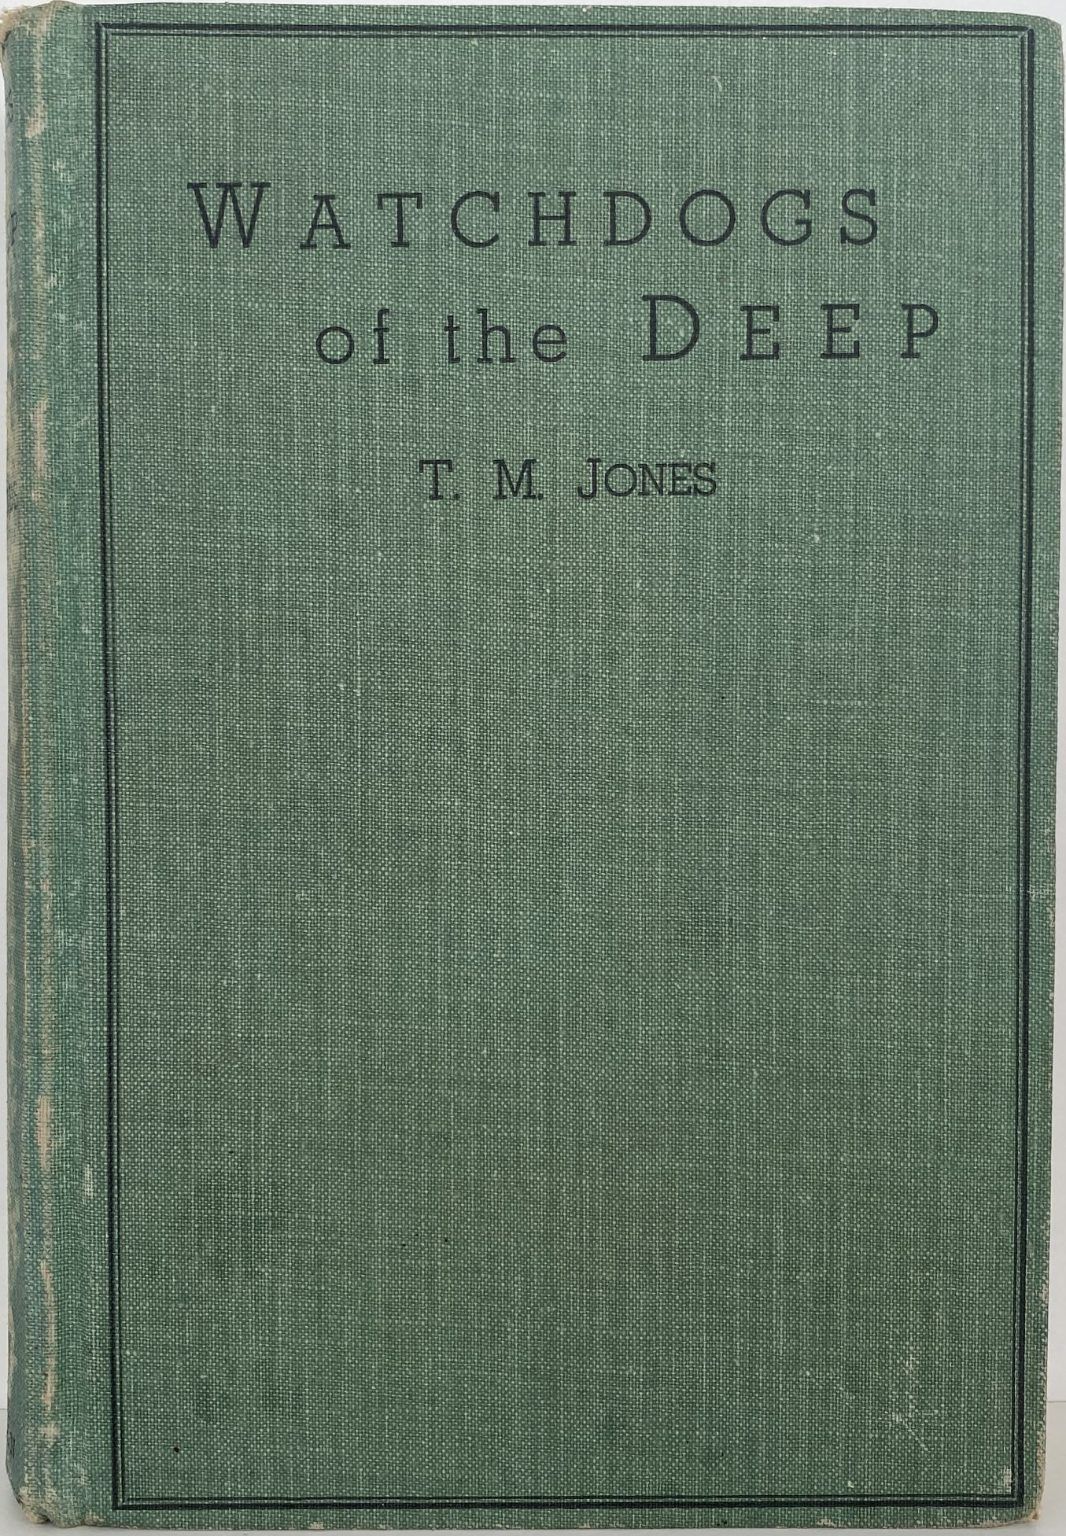 WATCHDOGS OF THE DEEP: Life in a Submarine During the Great War